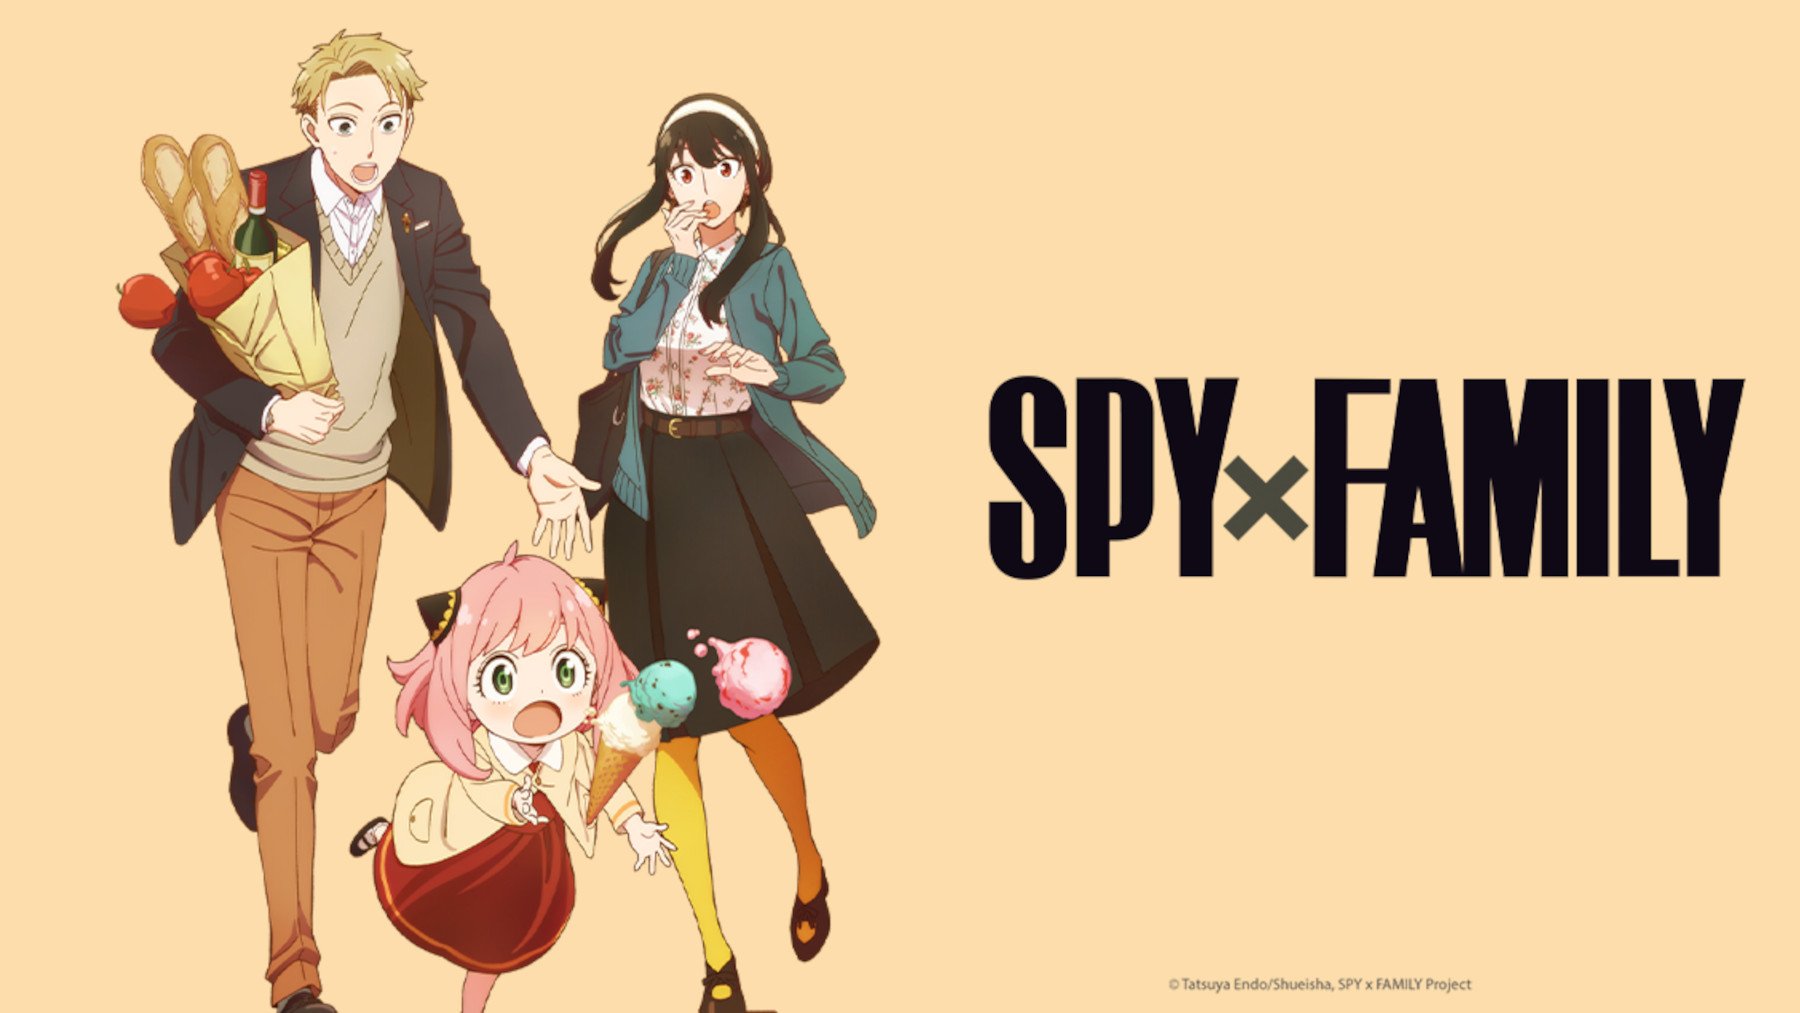 Key art for 'Spy x Family' anime adaptation. It features a seemingly normal looking family carrying groceries home.